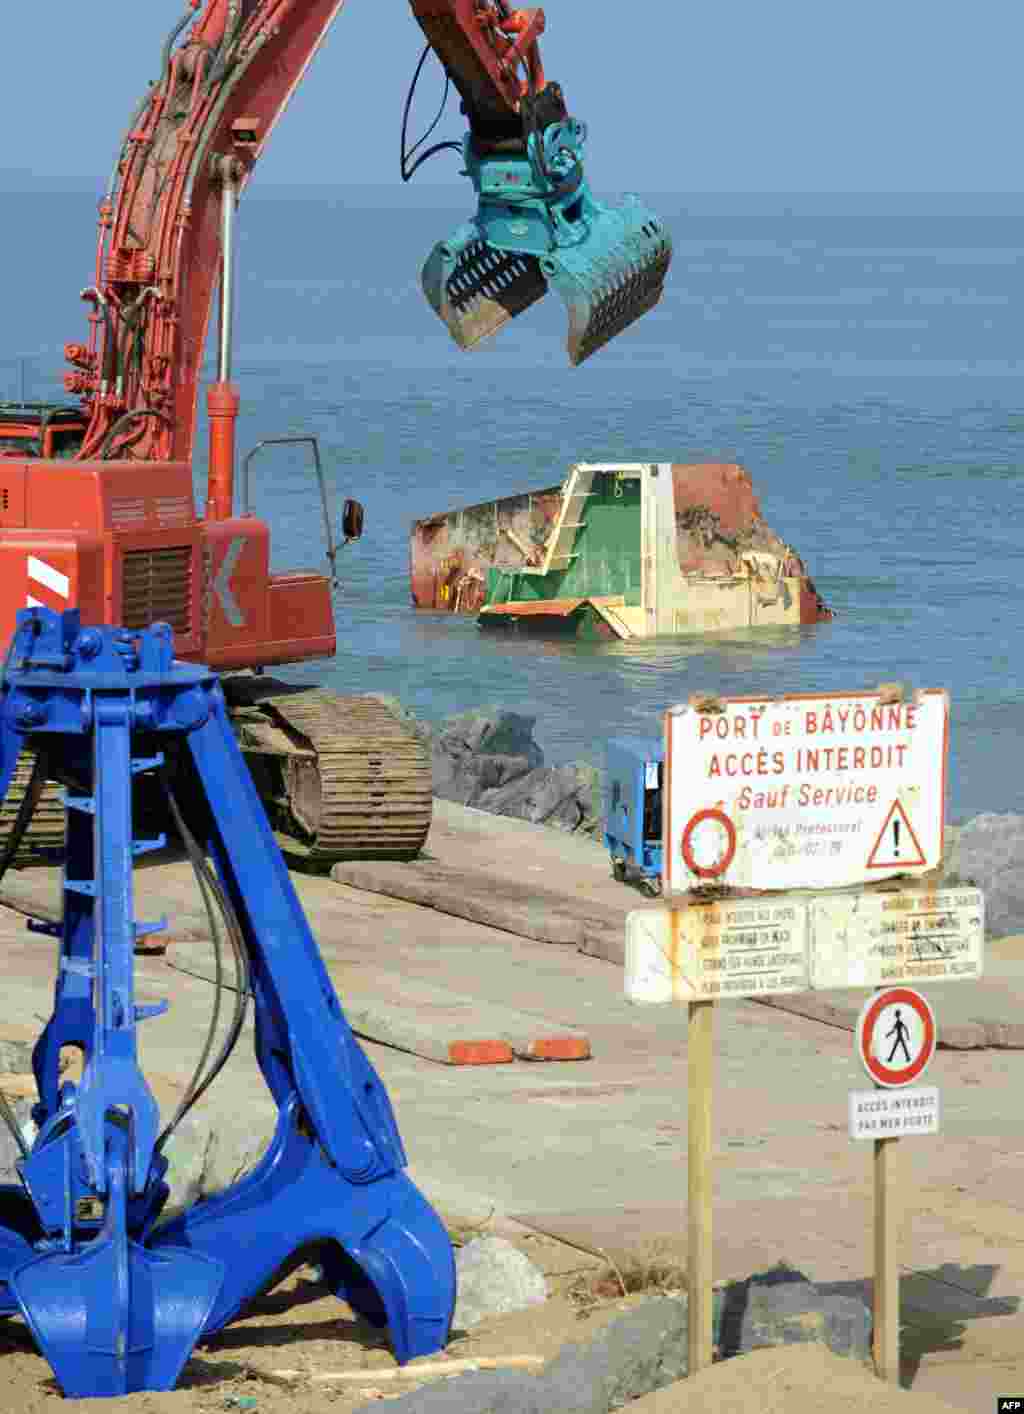 Picture shows cranes and part of the wreckage of the Spanish cargo ship &#39;Luno&#39; in Anglet, southwestern France, during the dismantling of the ship which broke into three sections after a shipwreck in February 2014. The 20-year-old Spanish vessel split in two when winds and waves smashed it up against an artificial breakwater on February 5. The crew of 11 were rescued by helicopter in perilous conditions.